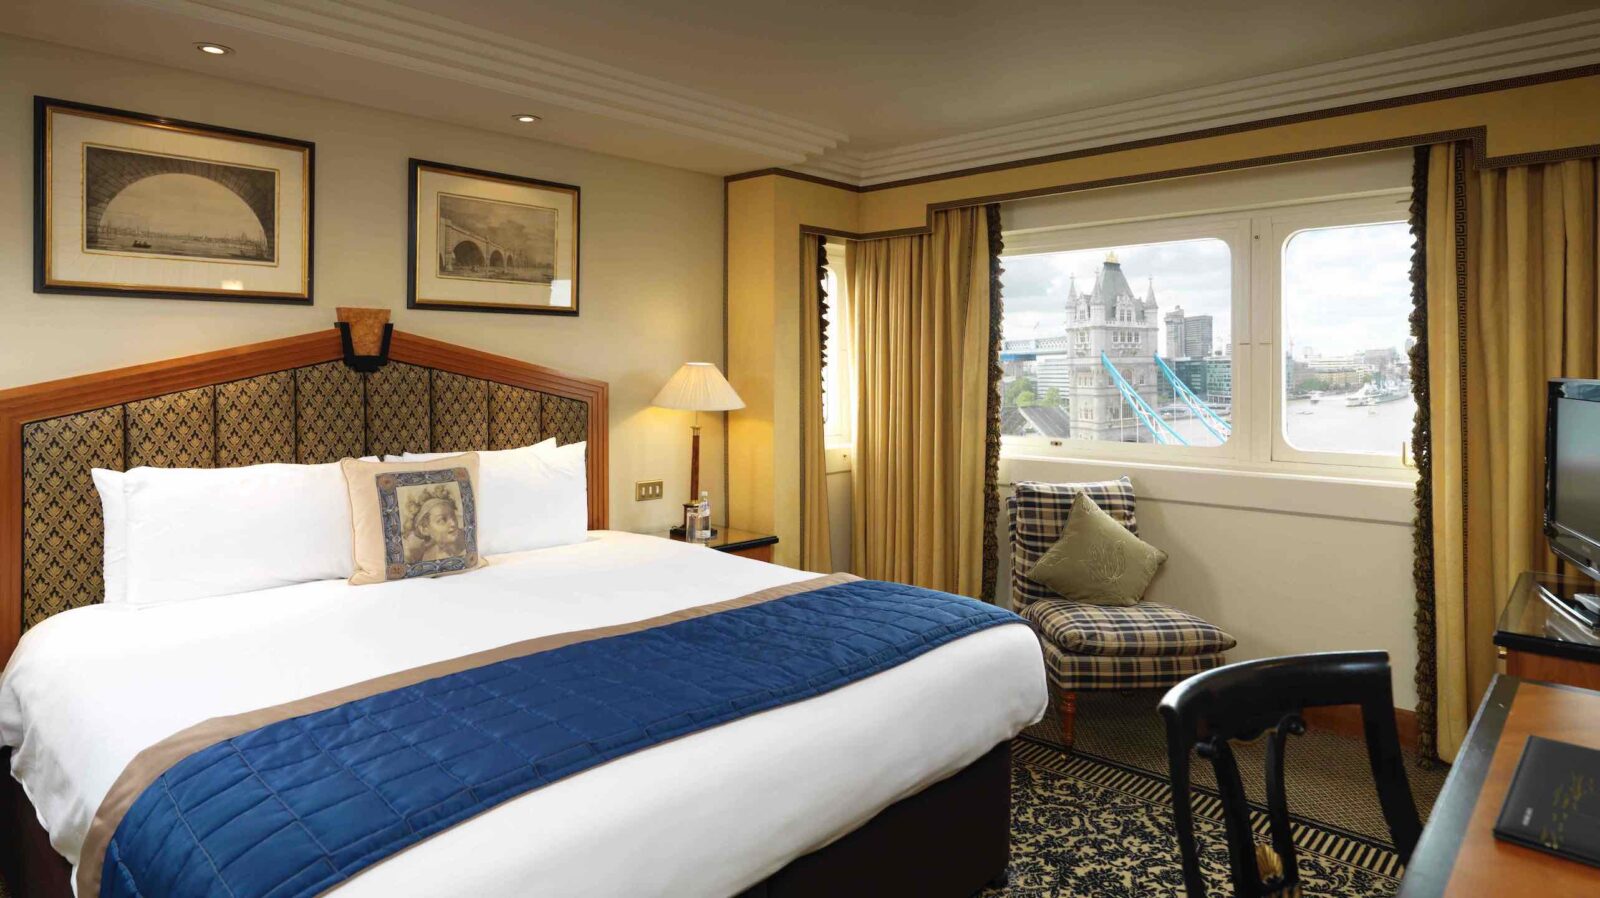 The Tower Hotel, London rooom with view of Tower Vridge from luxury hotels in the City of London